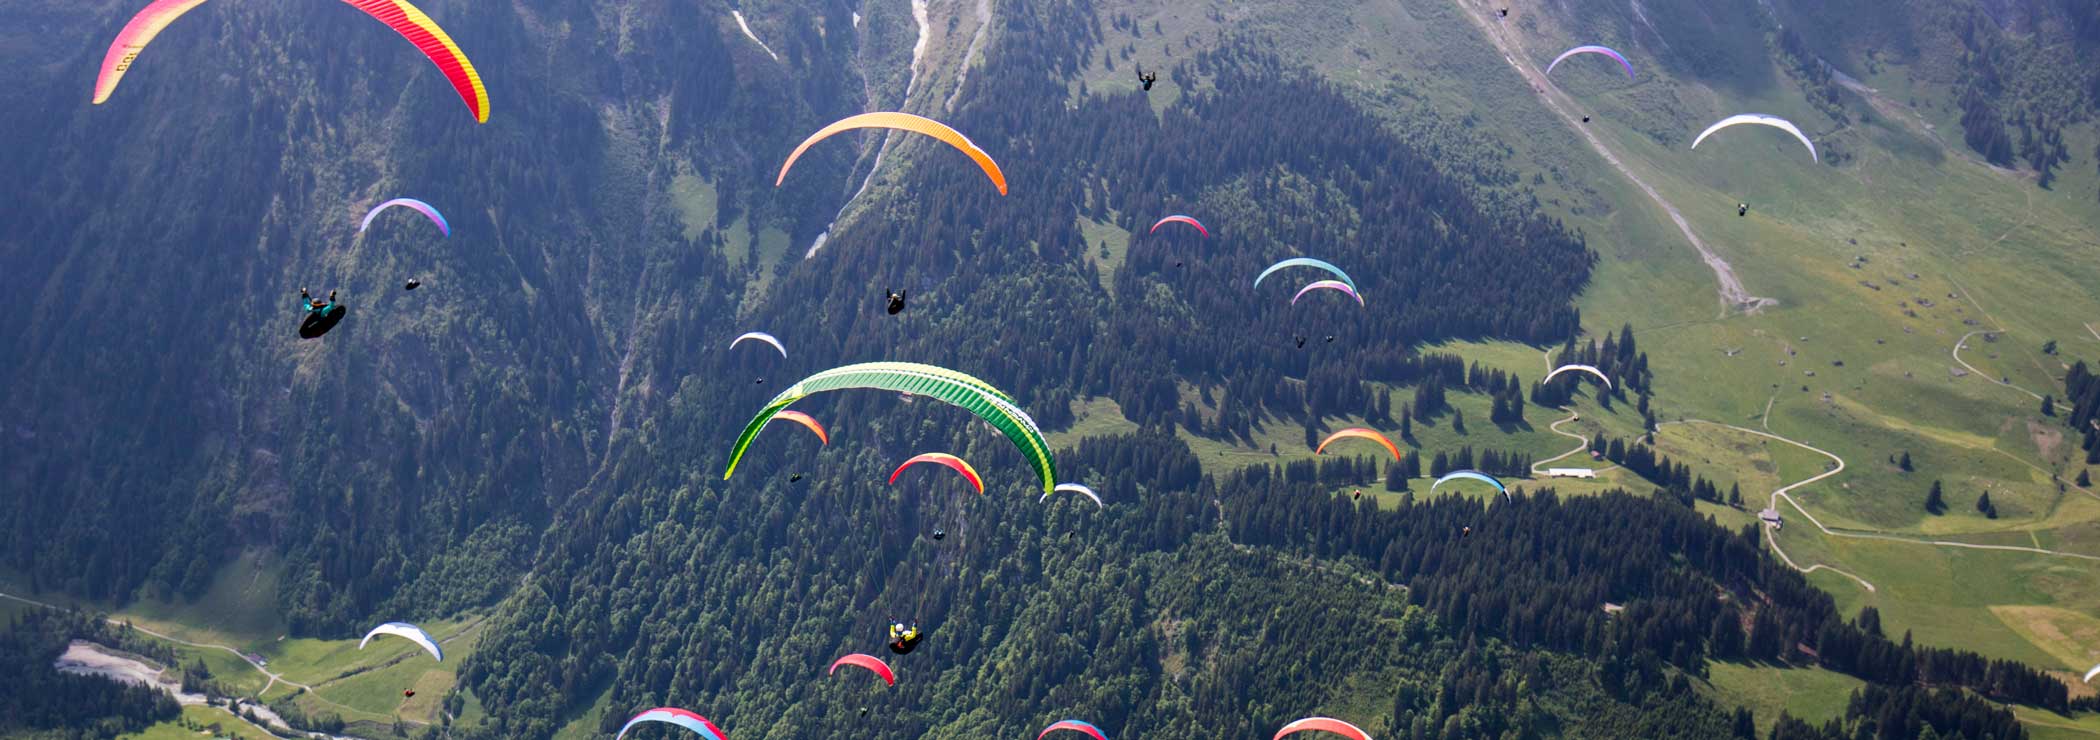 Paragliders flying towards a common goal